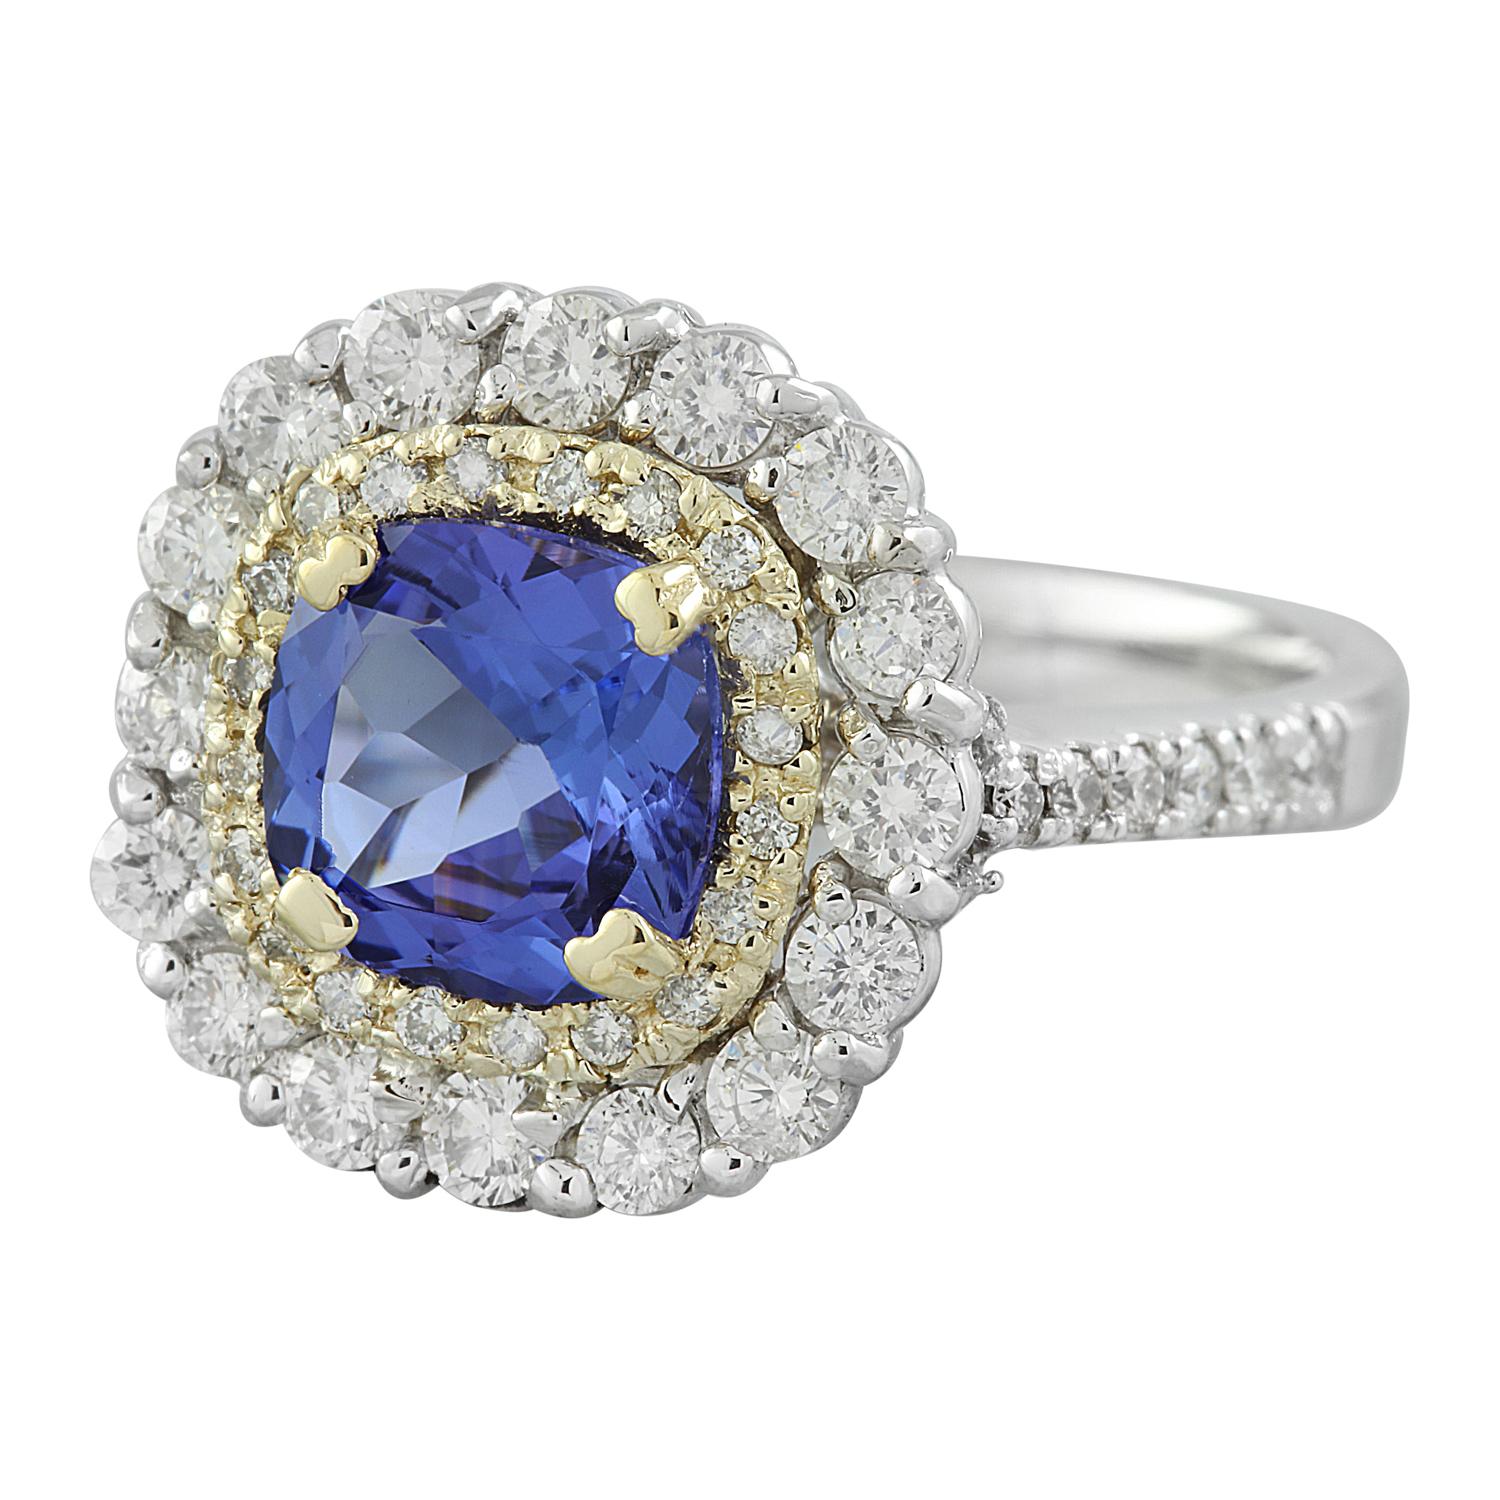 Introducing our exquisite Natural Tanzanite Diamond Ring, meticulously crafted in opulent 14K Two-Tone Gold. This captivating piece is a testament to timeless elegance and unparalleled craftsmanship, making it a perfect addition to your collection